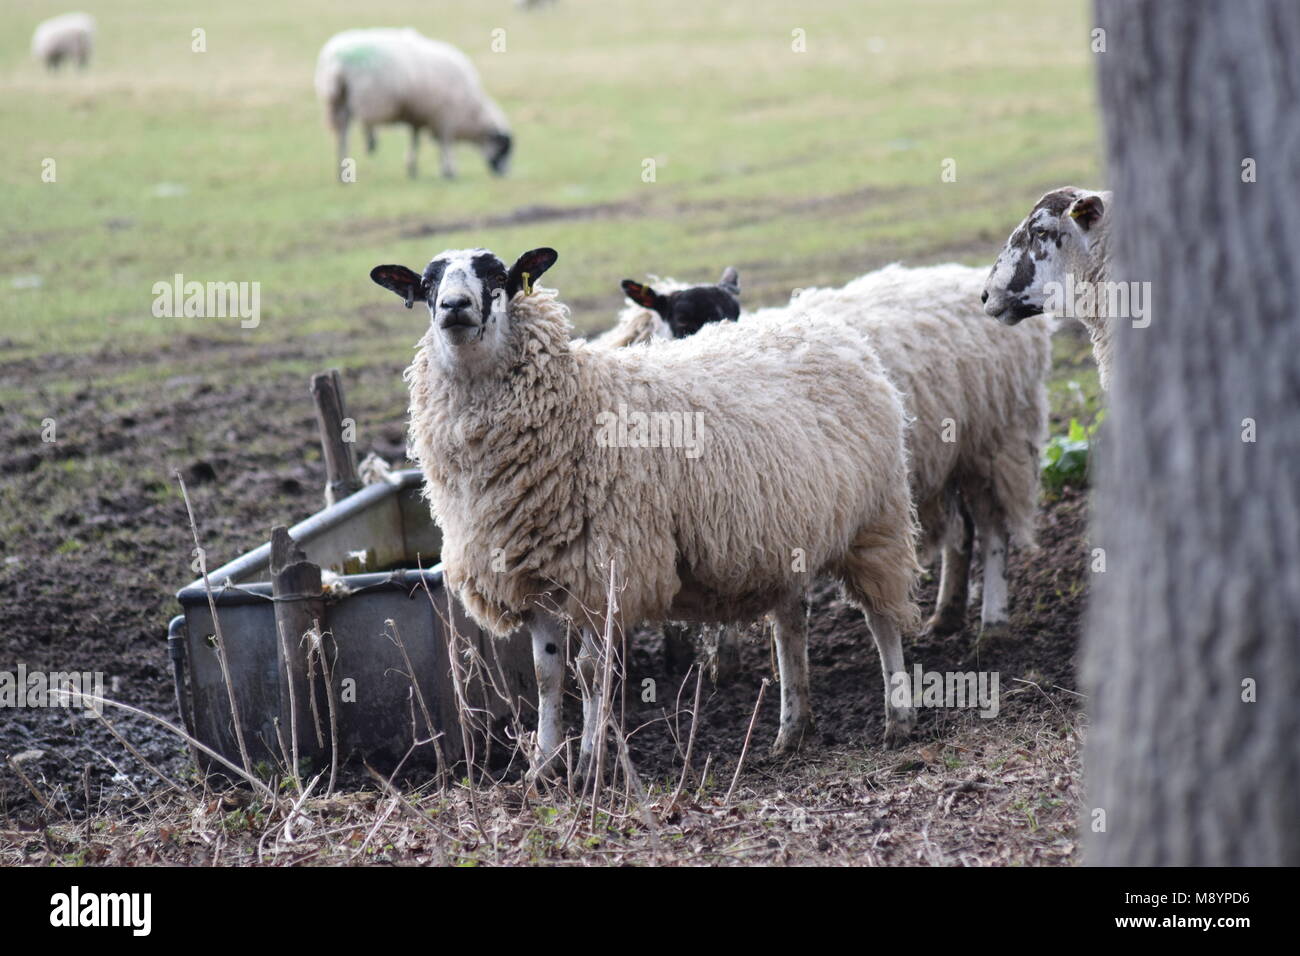 Signs of Spring: Protective ewes keeping a wary eye on humans, in Slindon, West Sussex. March 20th, 2018 Stock Photo